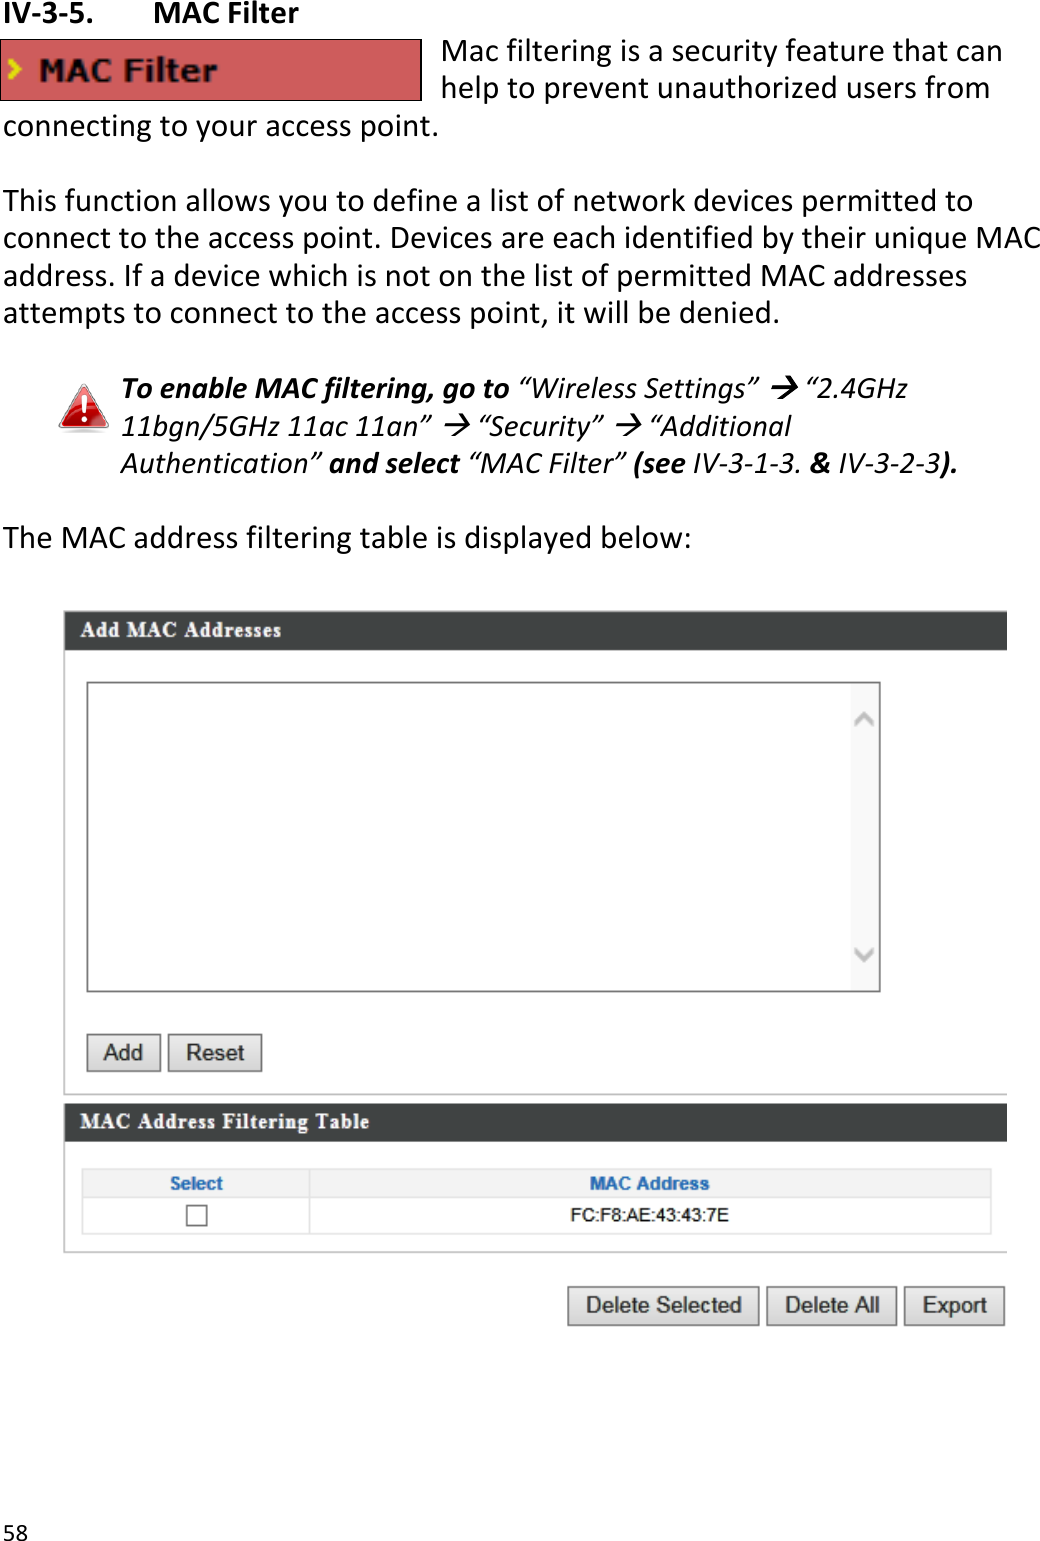 58  IV-3-5.   MAC Filter Mac filtering is a security feature that can help to prevent unauthorized users from connecting to your access point.  This function allows you to define a list of network devices permitted to connect to the access point. Devices are each identified by their unique MAC address. If a device which is not on the list of permitted MAC addresses attempts to connect to the access point, it will be denied.  To enable MAC filtering, go to “Wireless Settings”  “2.4GHz 11bgn/5GHz 11ac 11an”  “Security”  “Additional Authentication” and select “MAC Filter” (see IV-3-1-3. &amp; IV-3-2-3).  The MAC address filtering table is displayed below:       